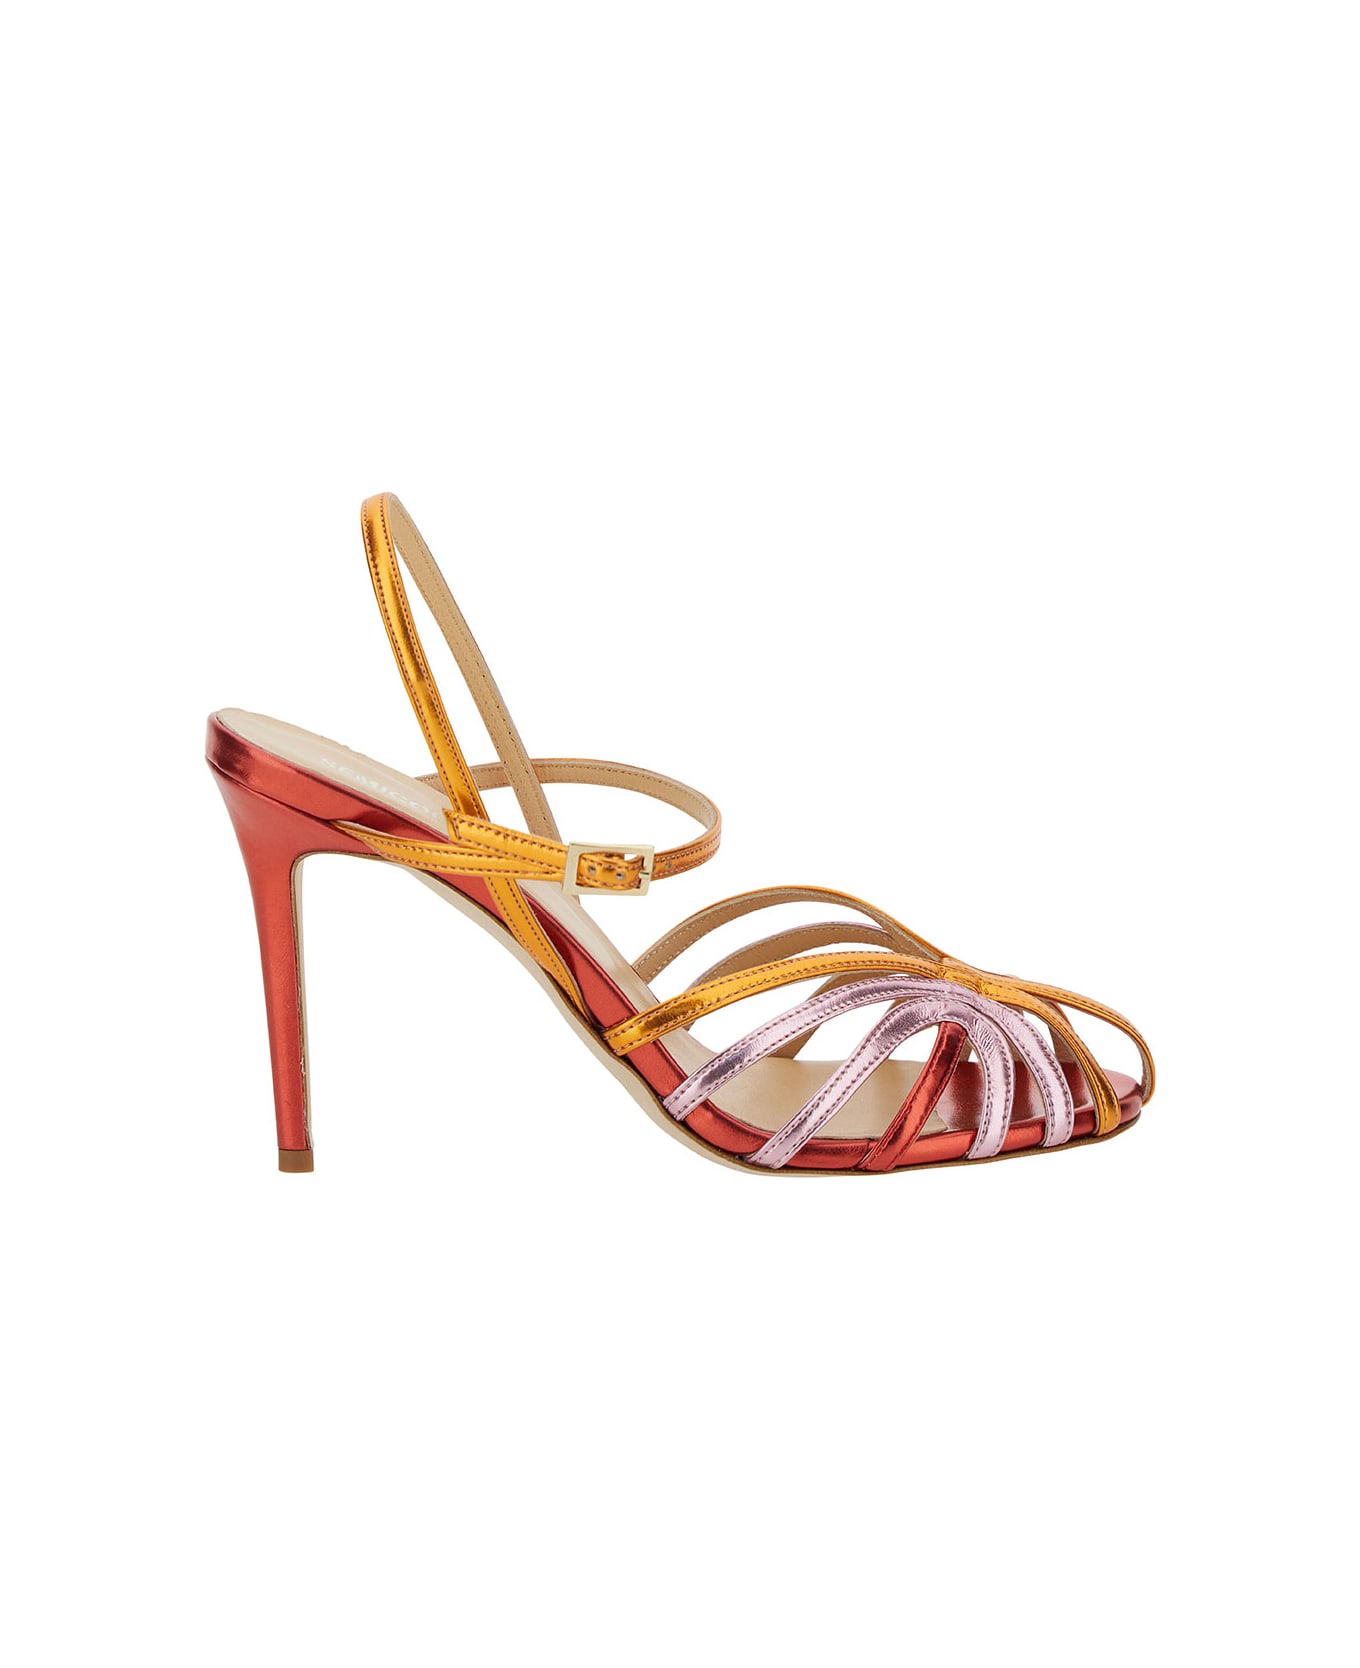 SEMICOUTURE Tricolor Mirrored Sandal With Front Cage In Faux Leather Woman - Multicolor サンダル